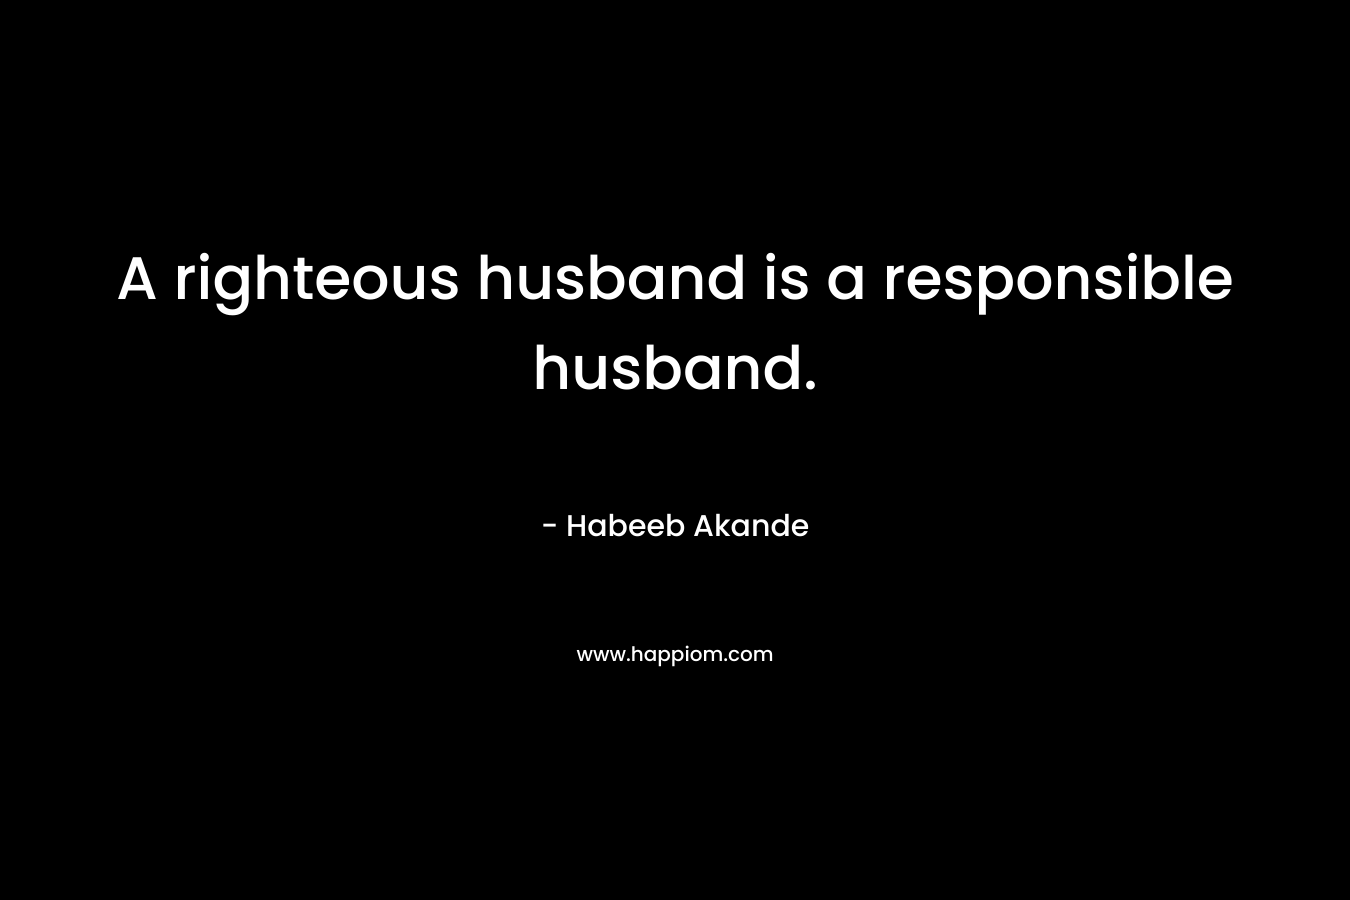 A righteous husband is a responsible husband. – Habeeb Akande